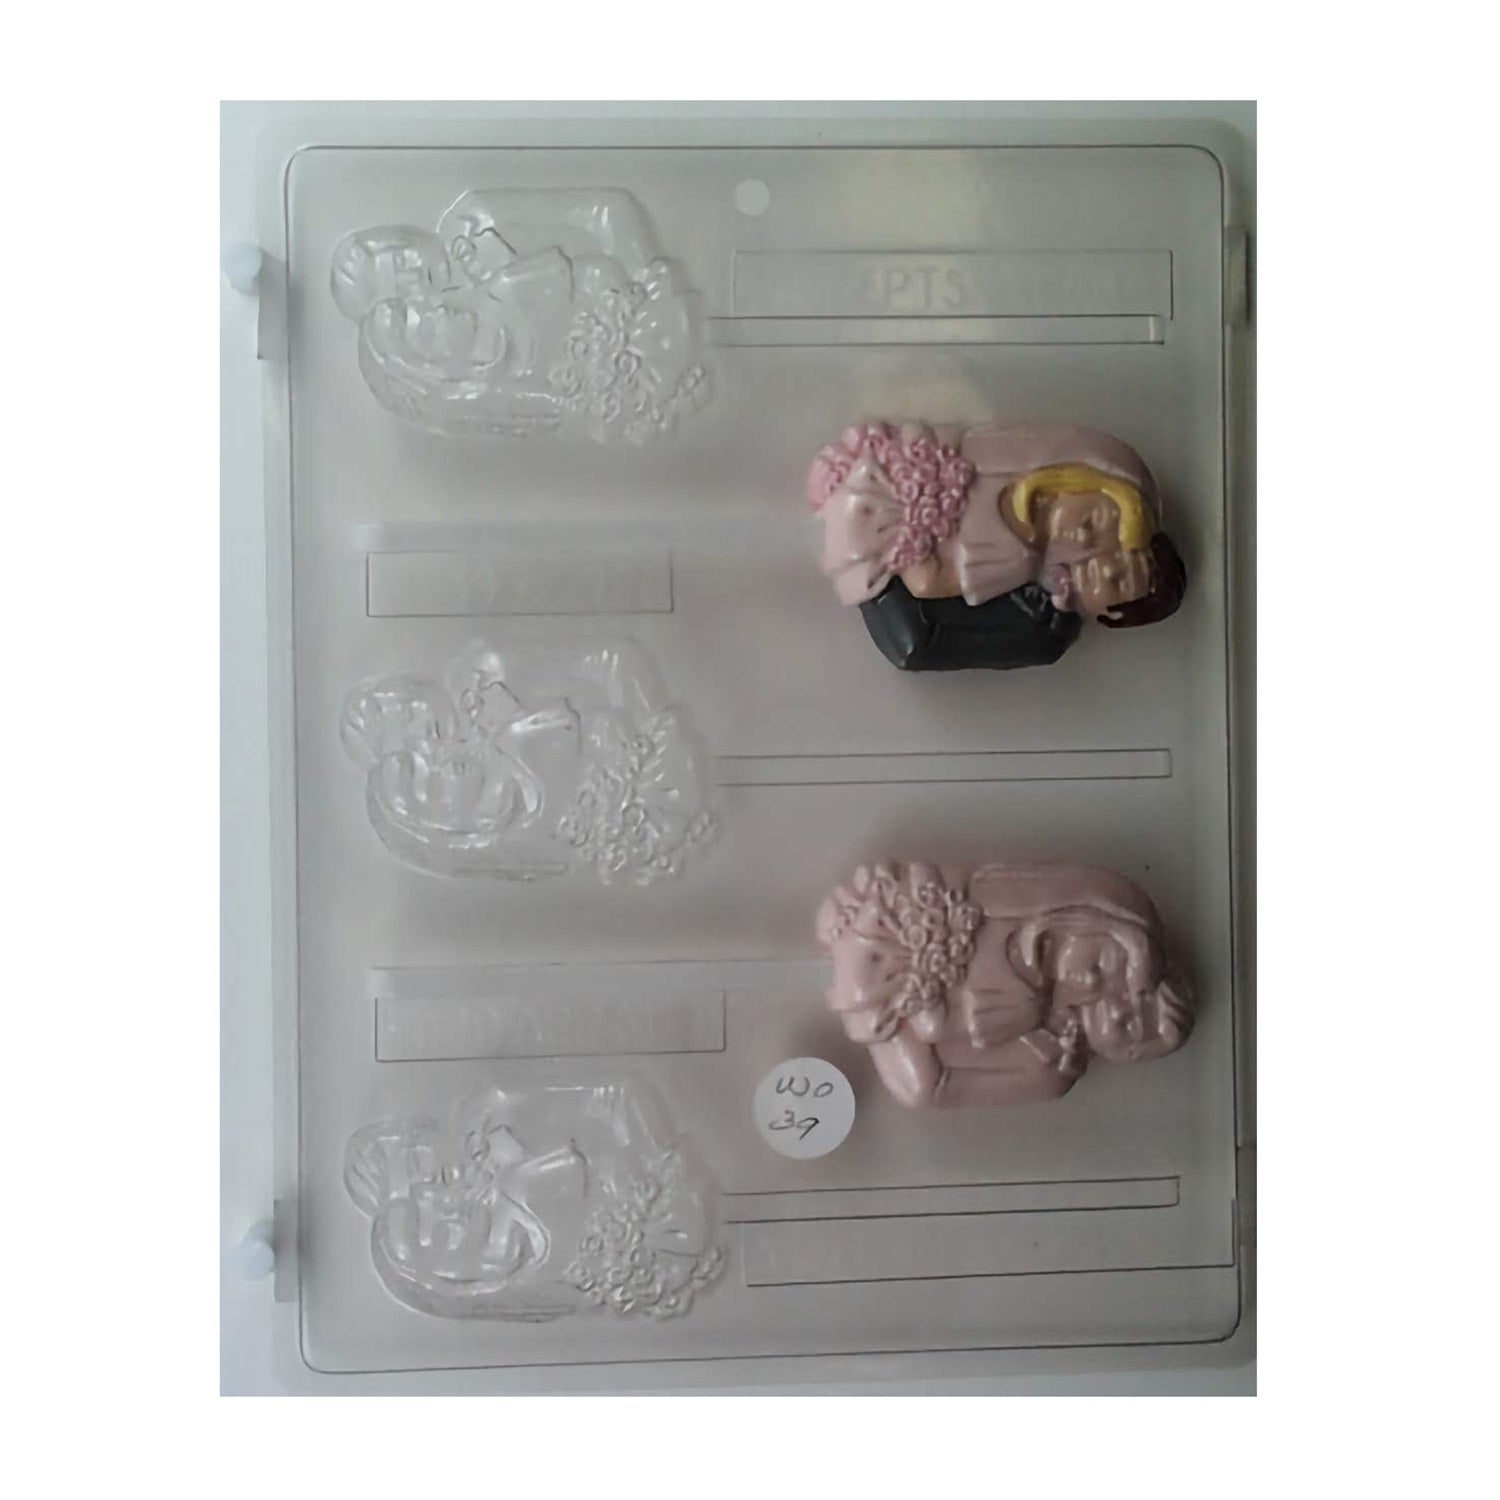 Chocolate mold with a bride and groom in a front-facing pose, ideal for creating wedding lollipop favors, with intricate details like a bouquet and formal attire.